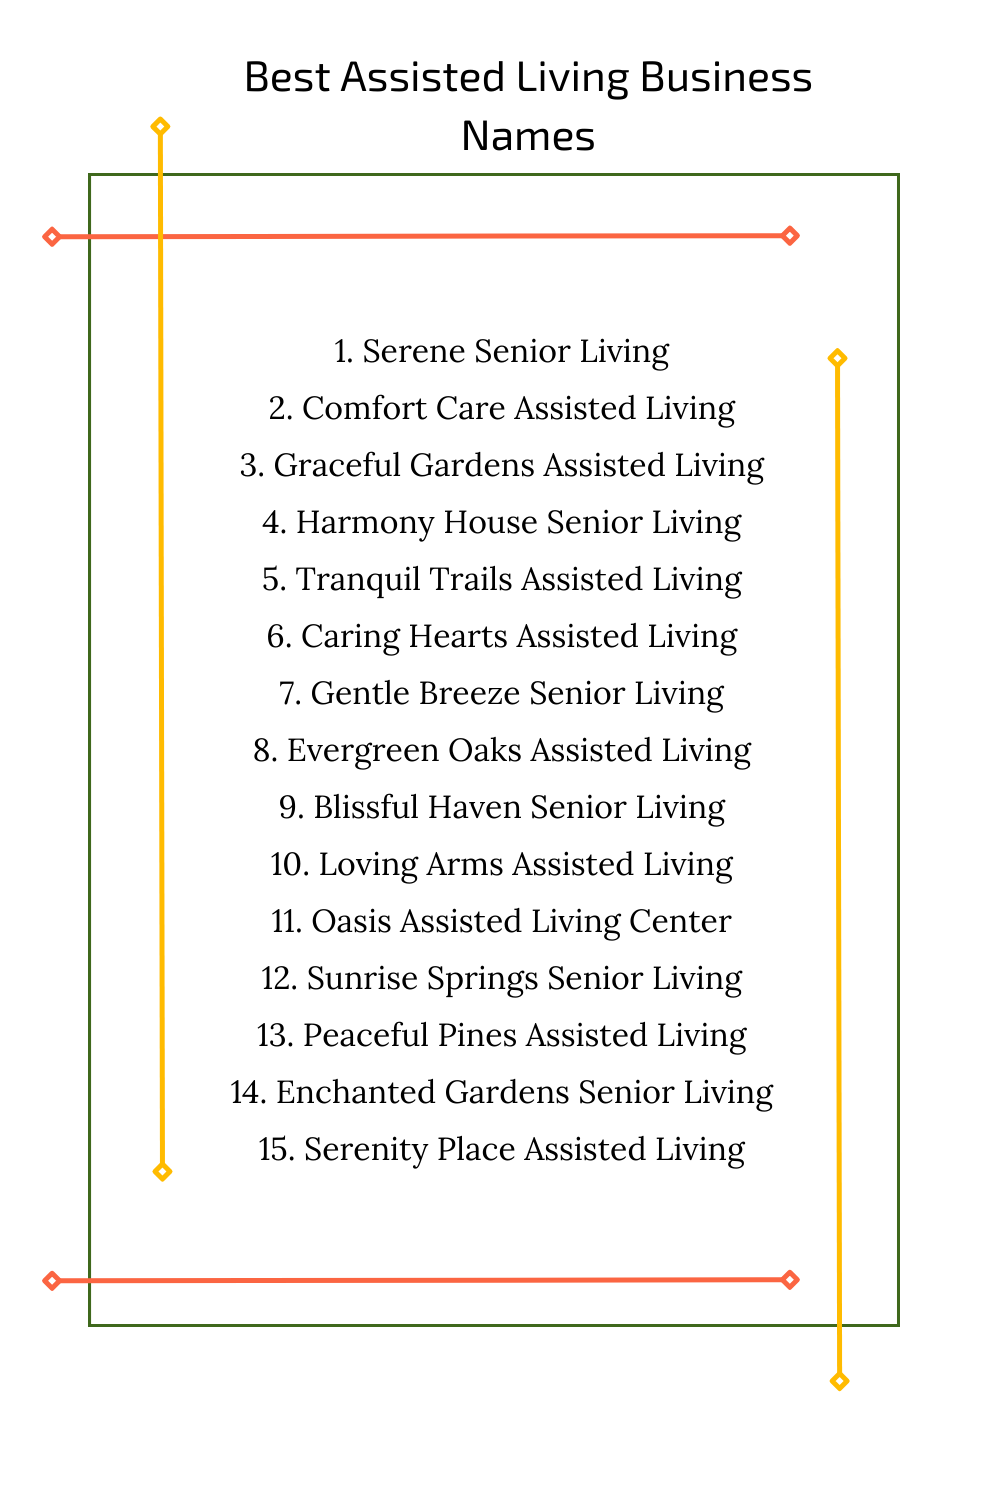 Best Assisted Living Business Names